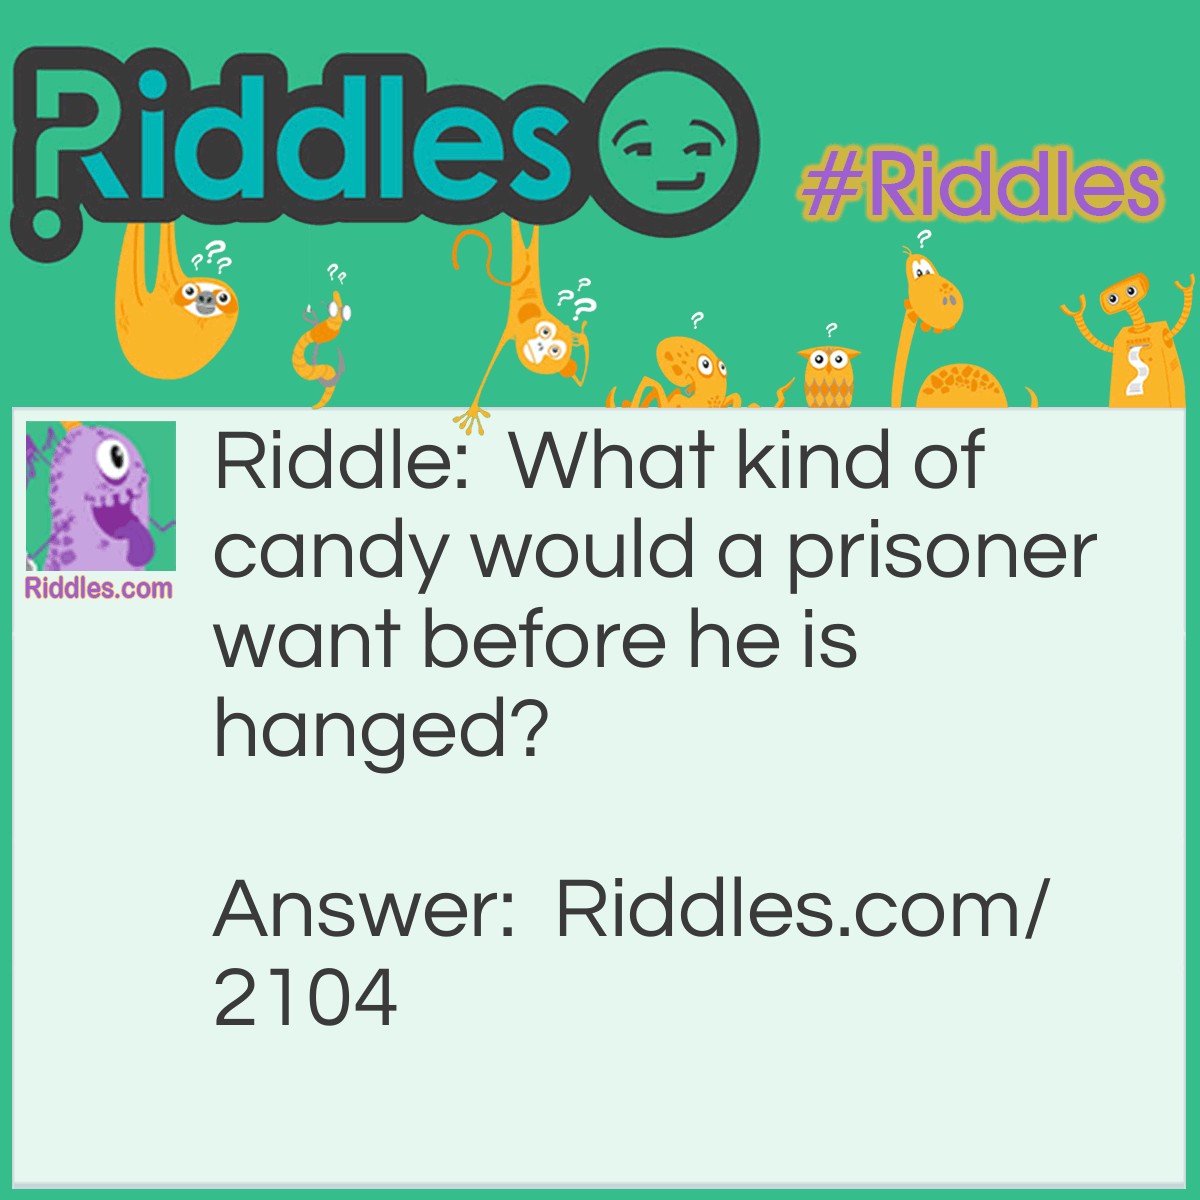 Riddle: What kind of candy would a prisoner want before he is executed? Answer: A Life Saver.